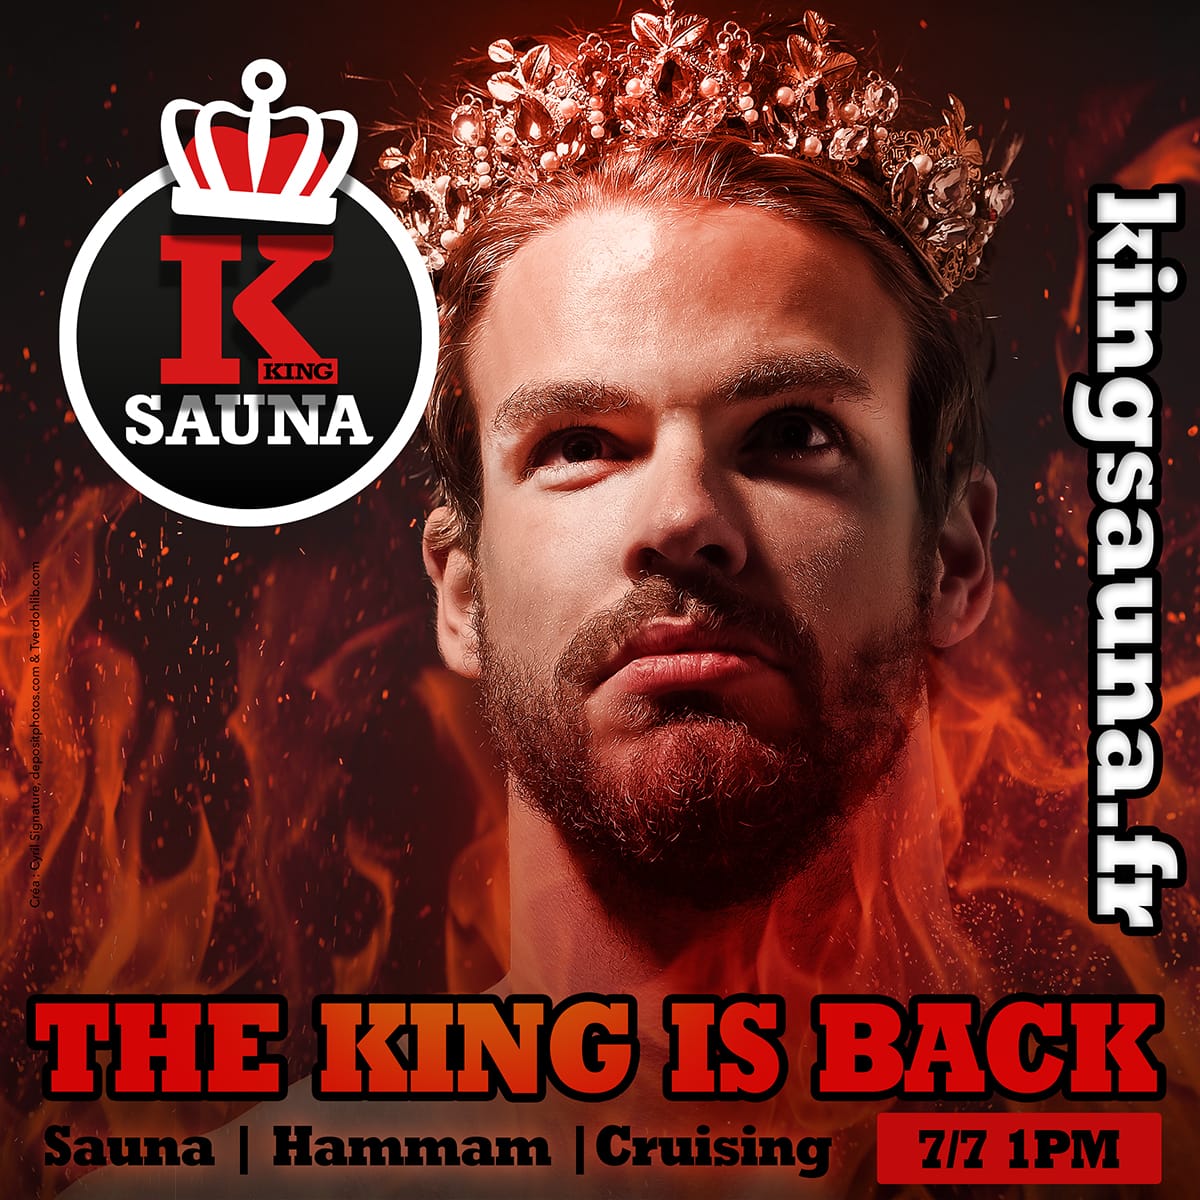 The king sauna is back